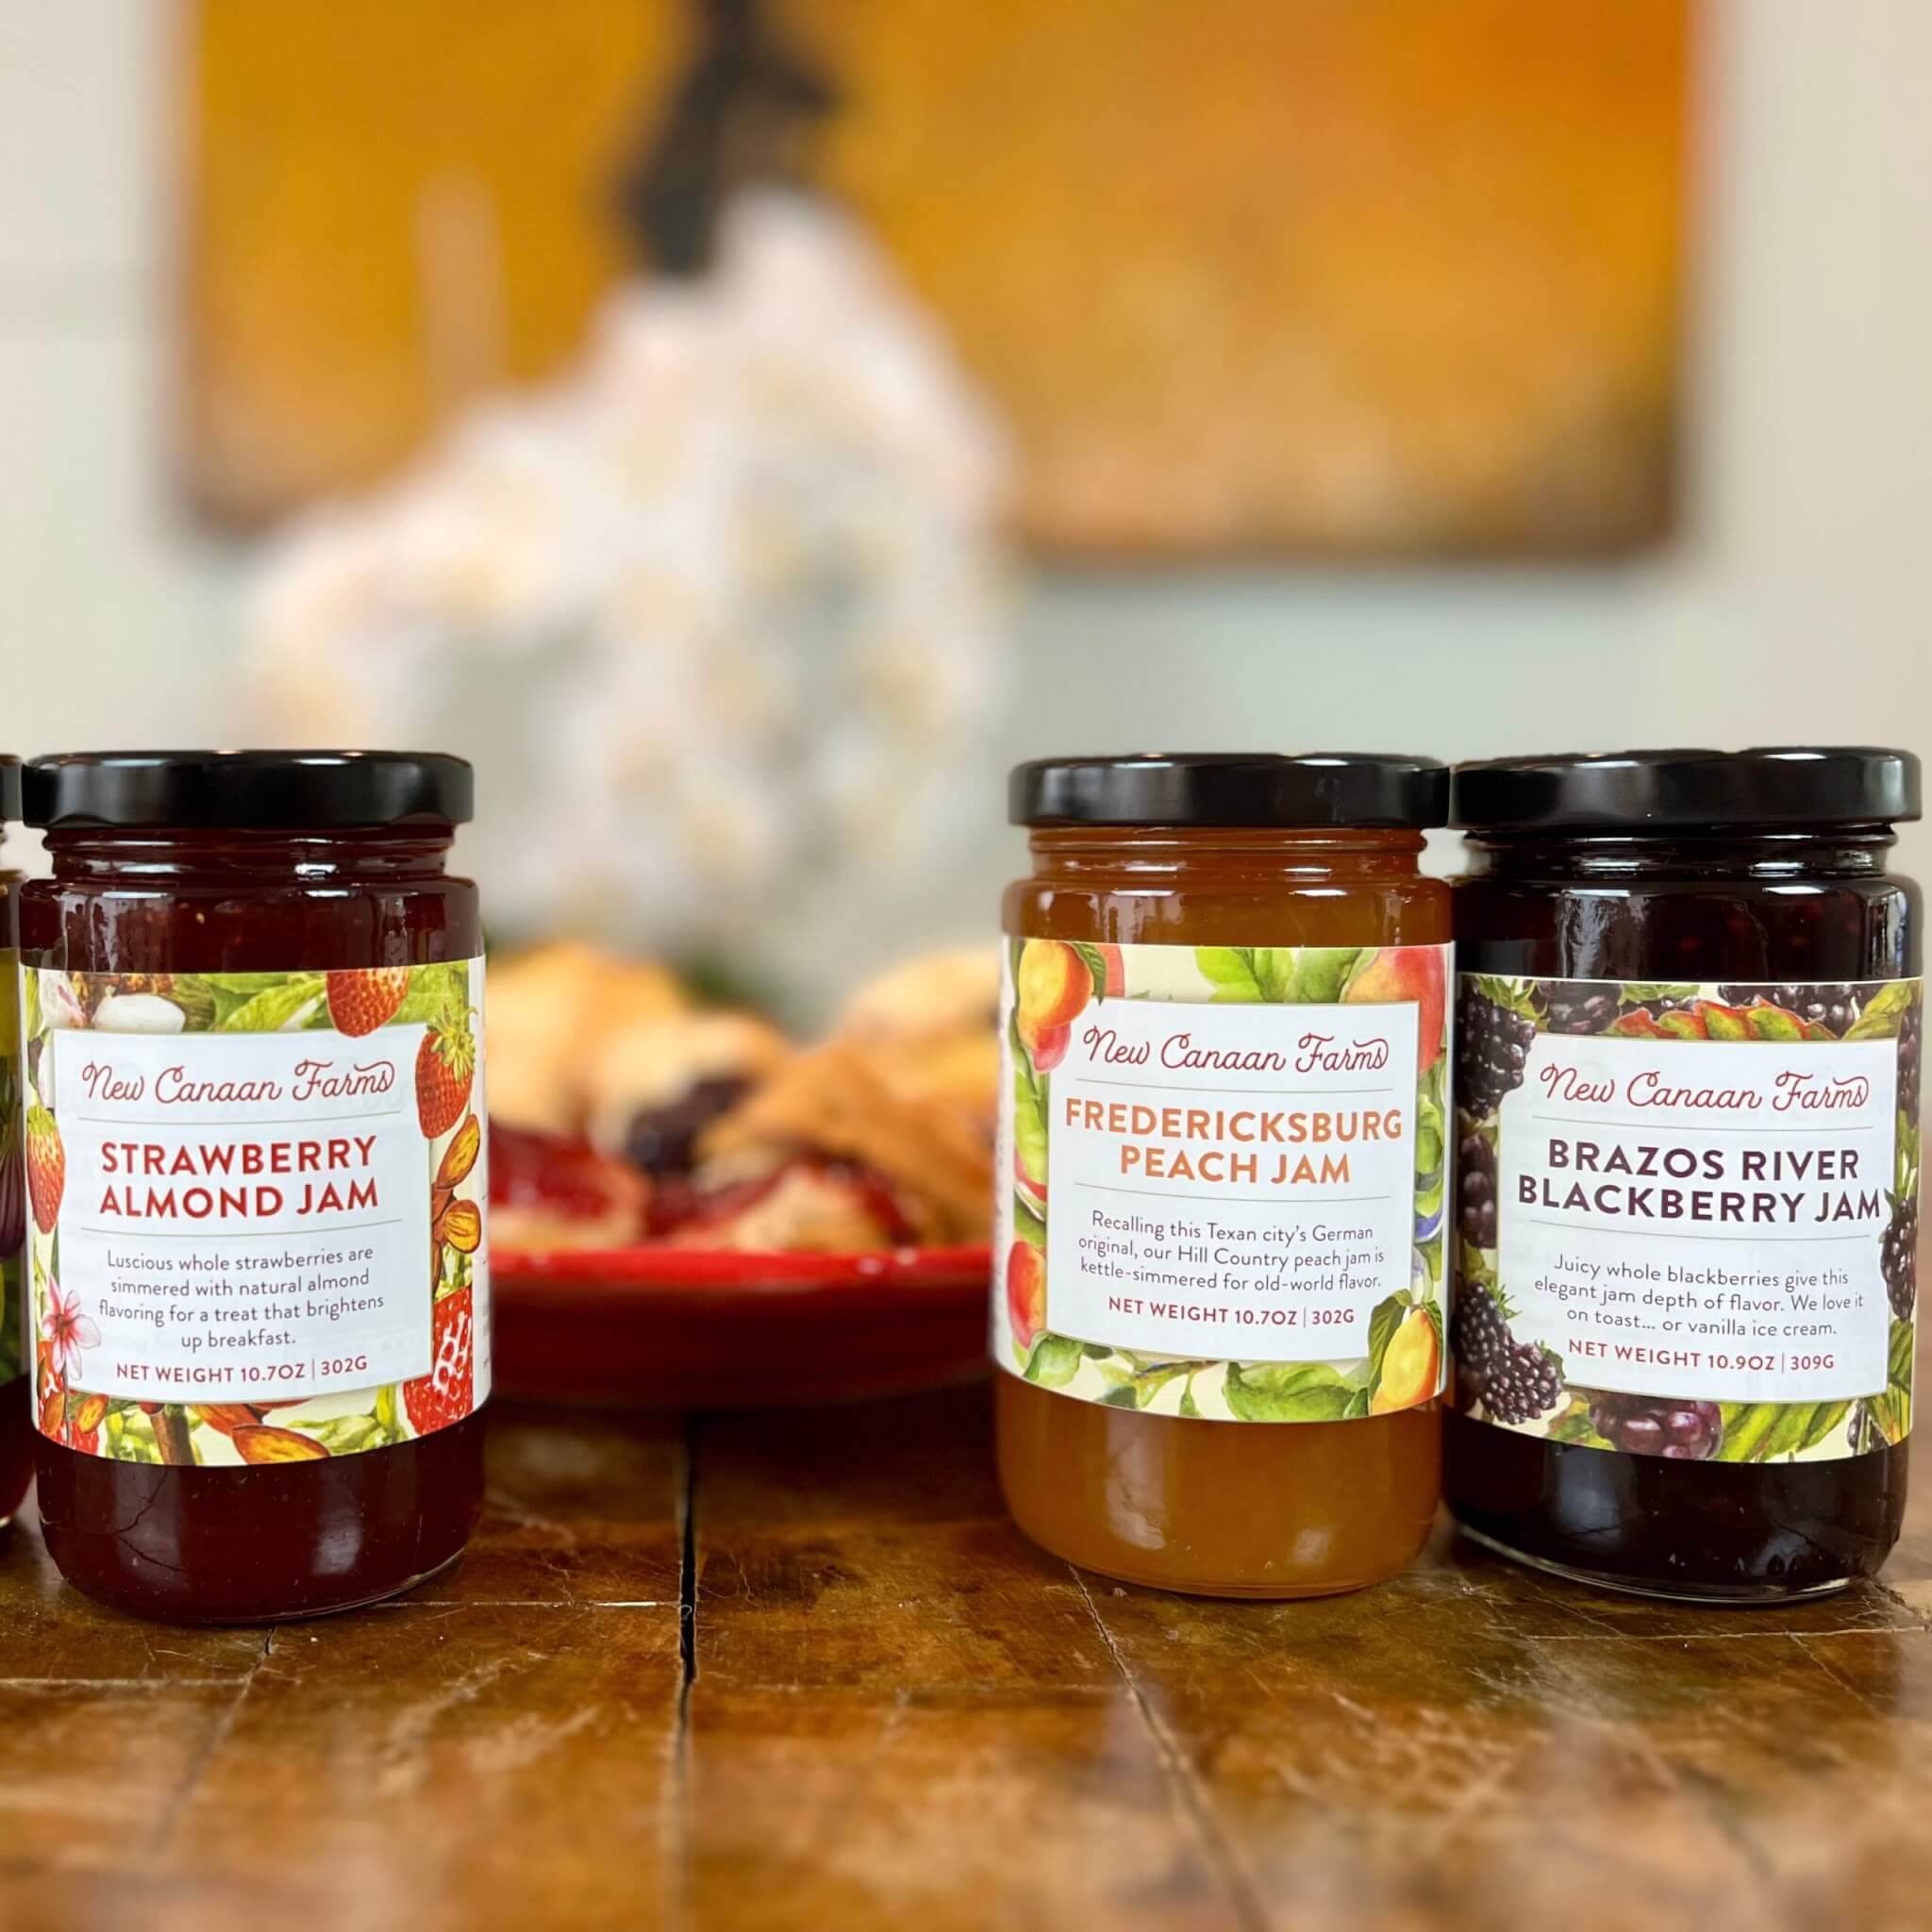 3 favorite New Canaan Farms sweet jams: Blackberry, Peach and Strawberry Almond